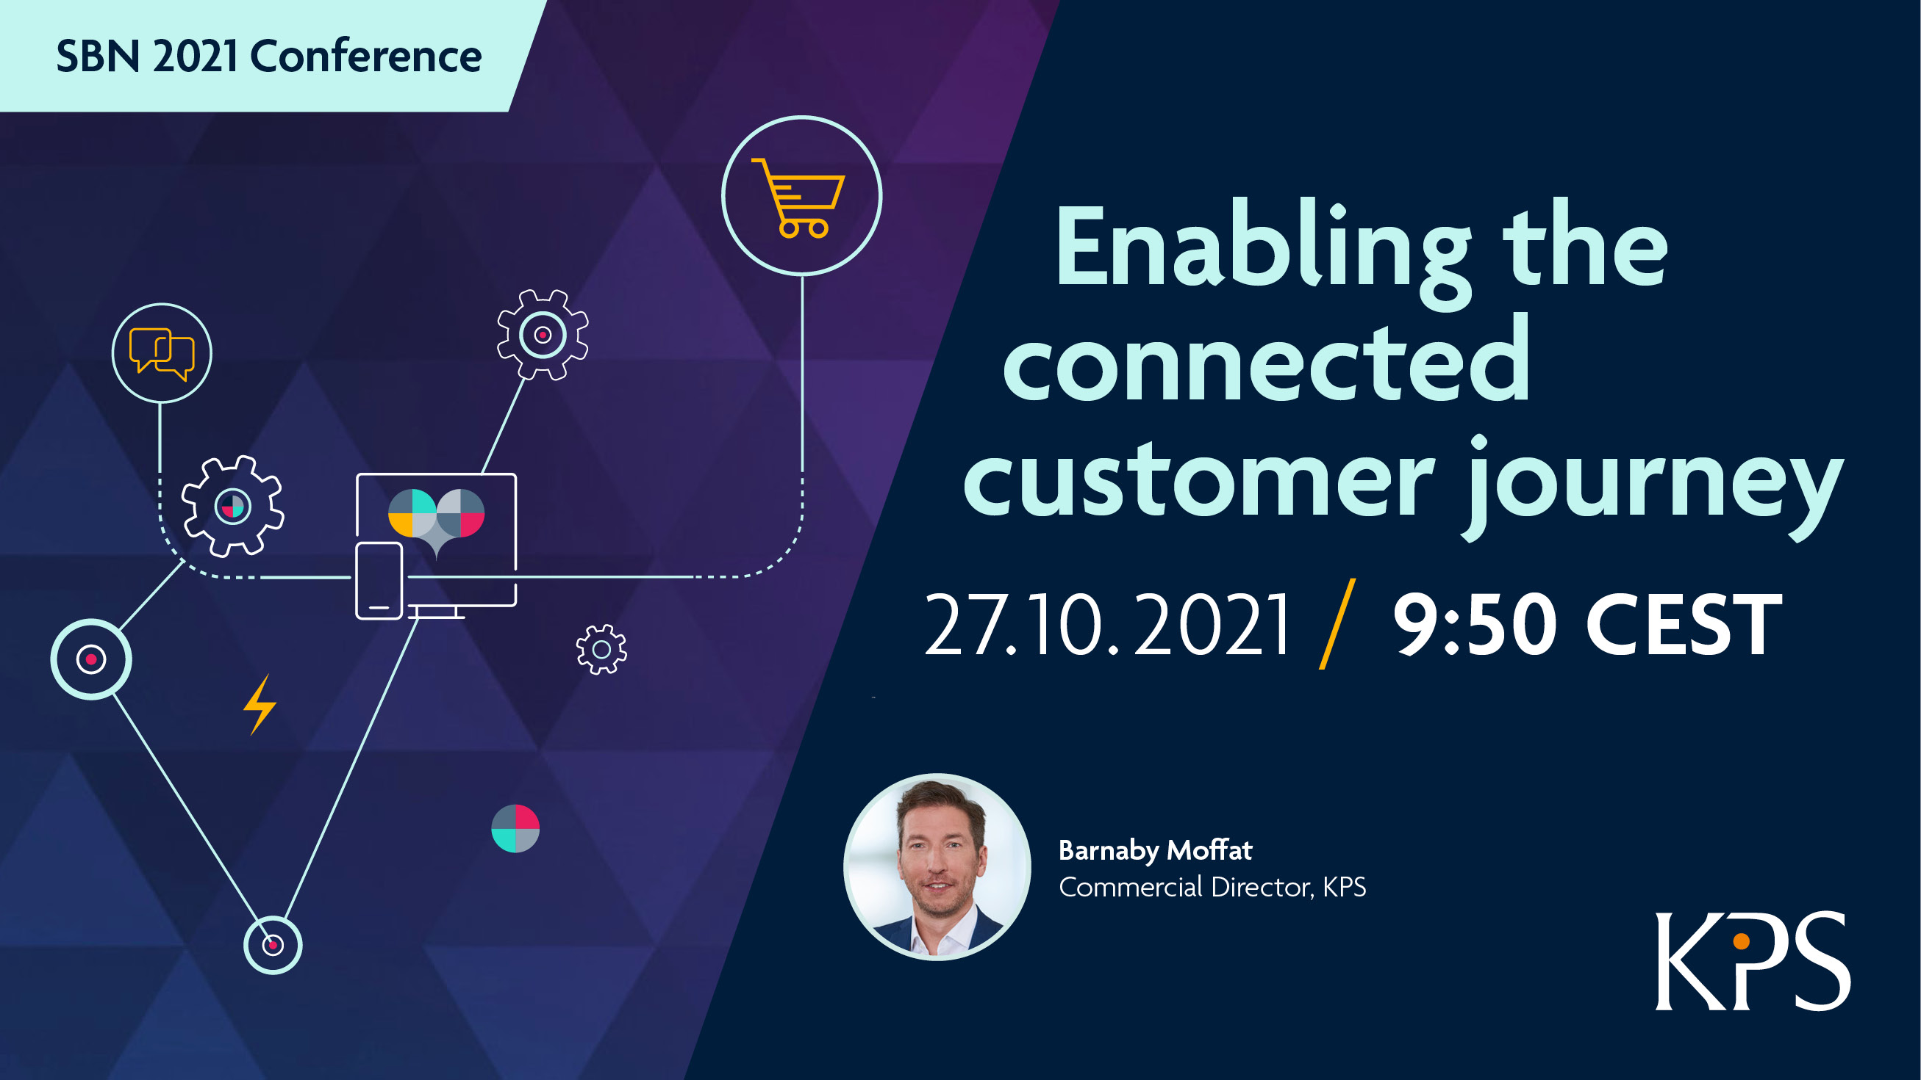 Enabling the connected customer journey